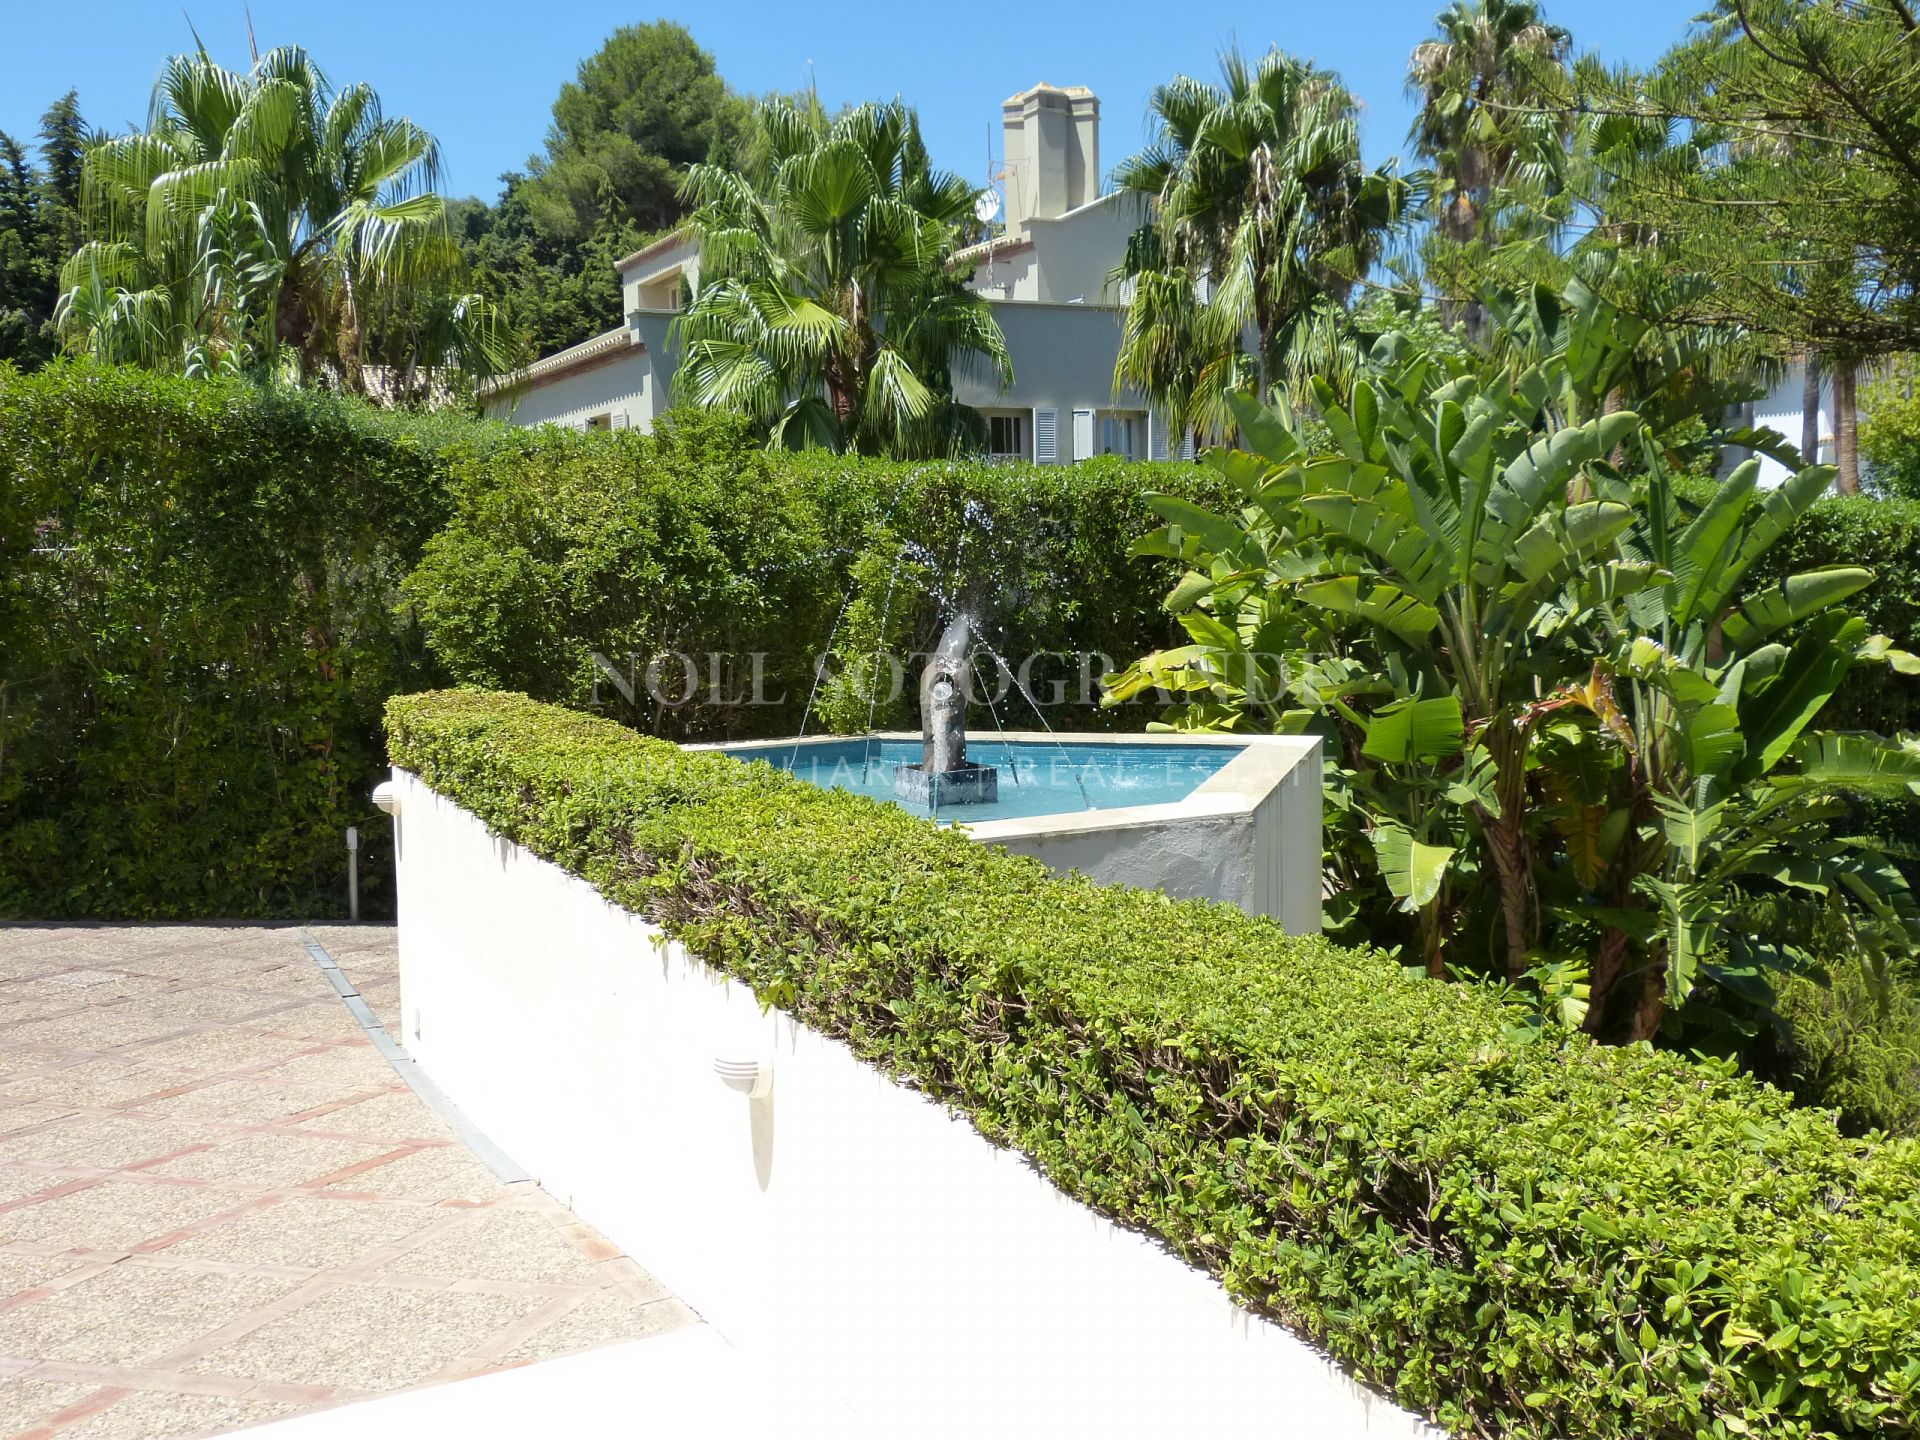 Villa for holiday rentals in Sotogrande Costa Kings and Queens area